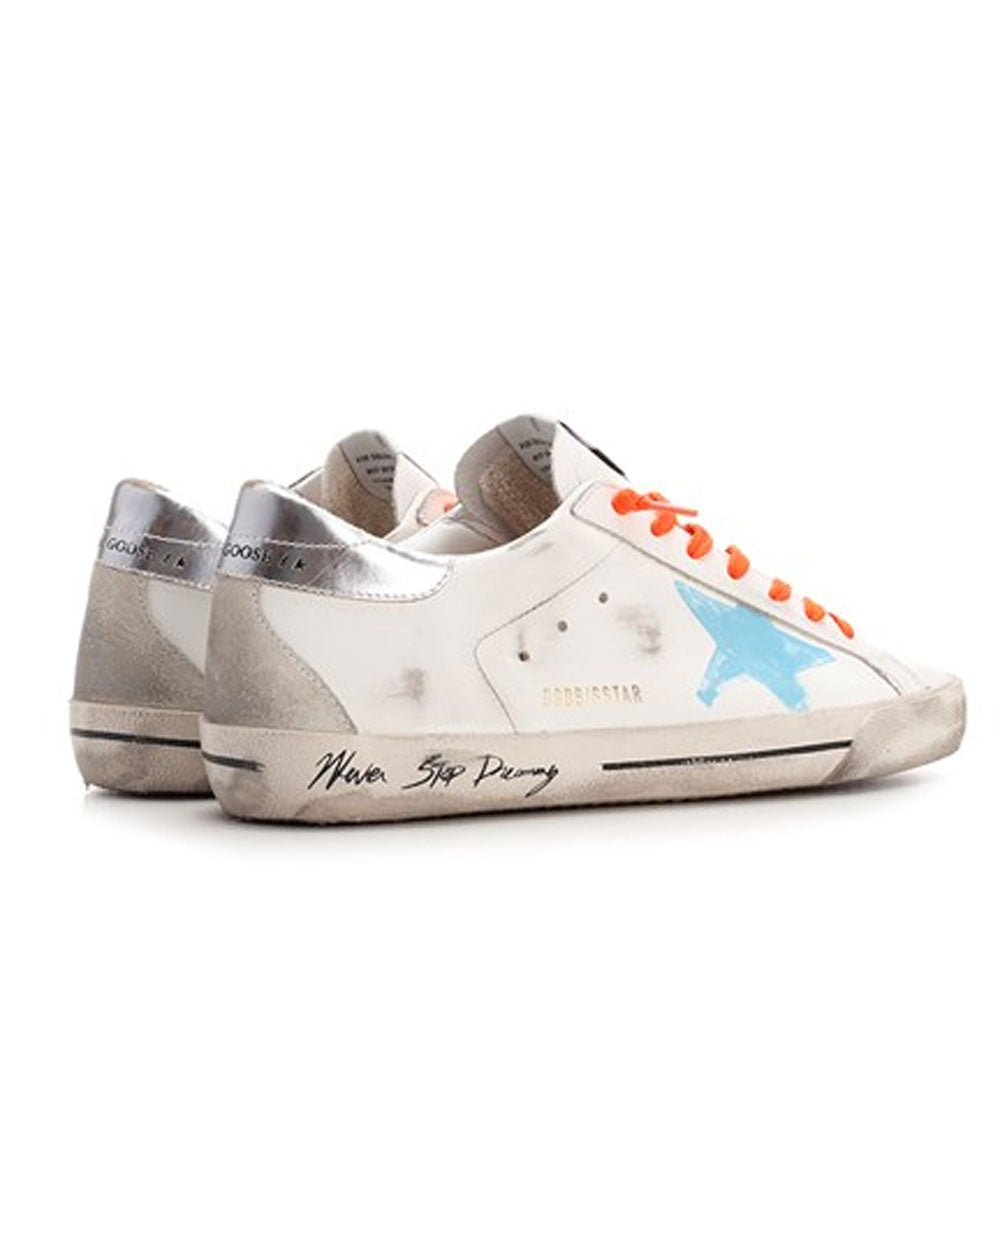 Super Star Sneaker in White, Blue, and Silver